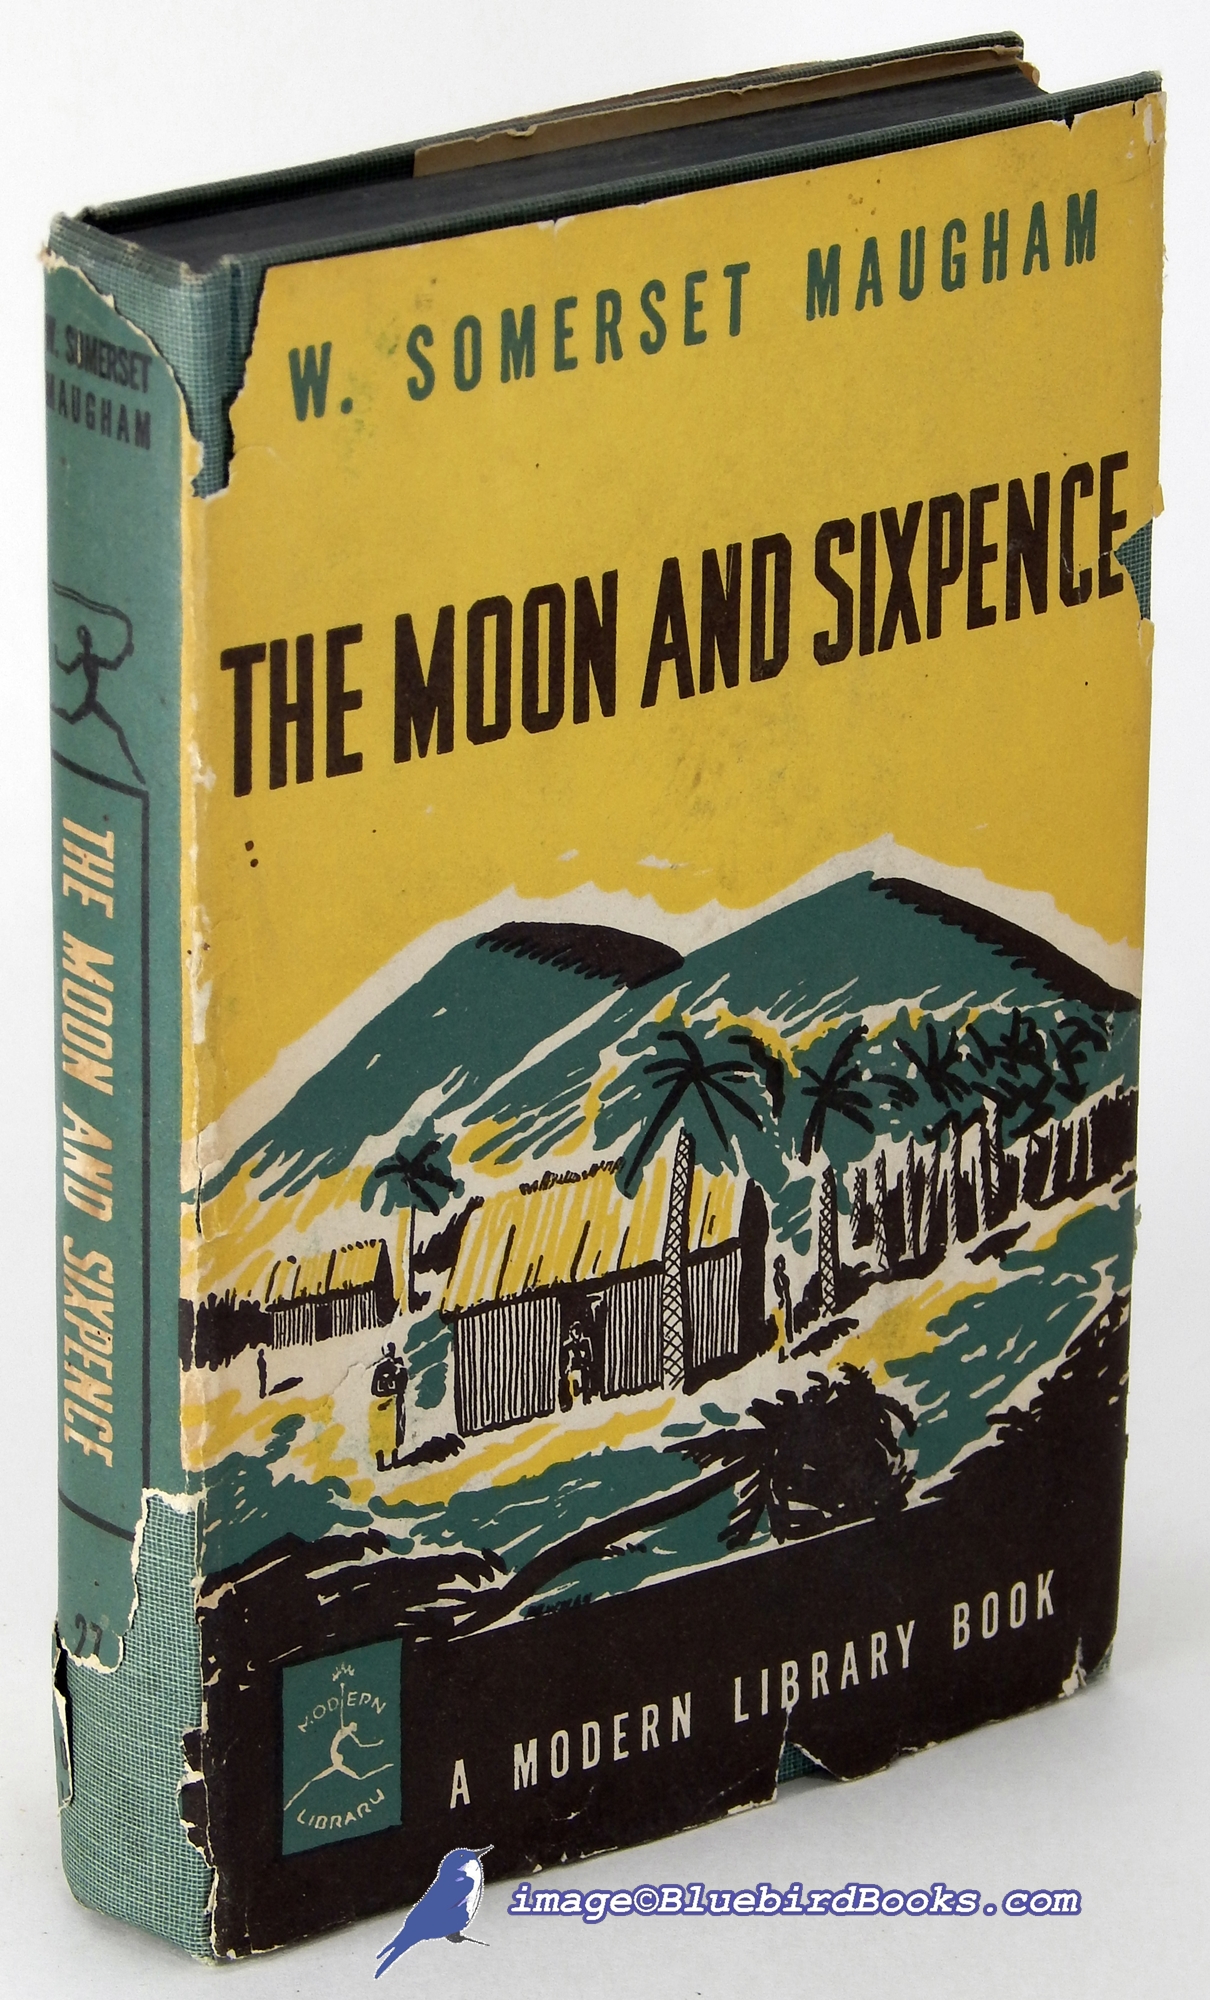 MAUGHAM, W. SOMERSET - The Moon and Sixpence (Modern Library #27. 2)